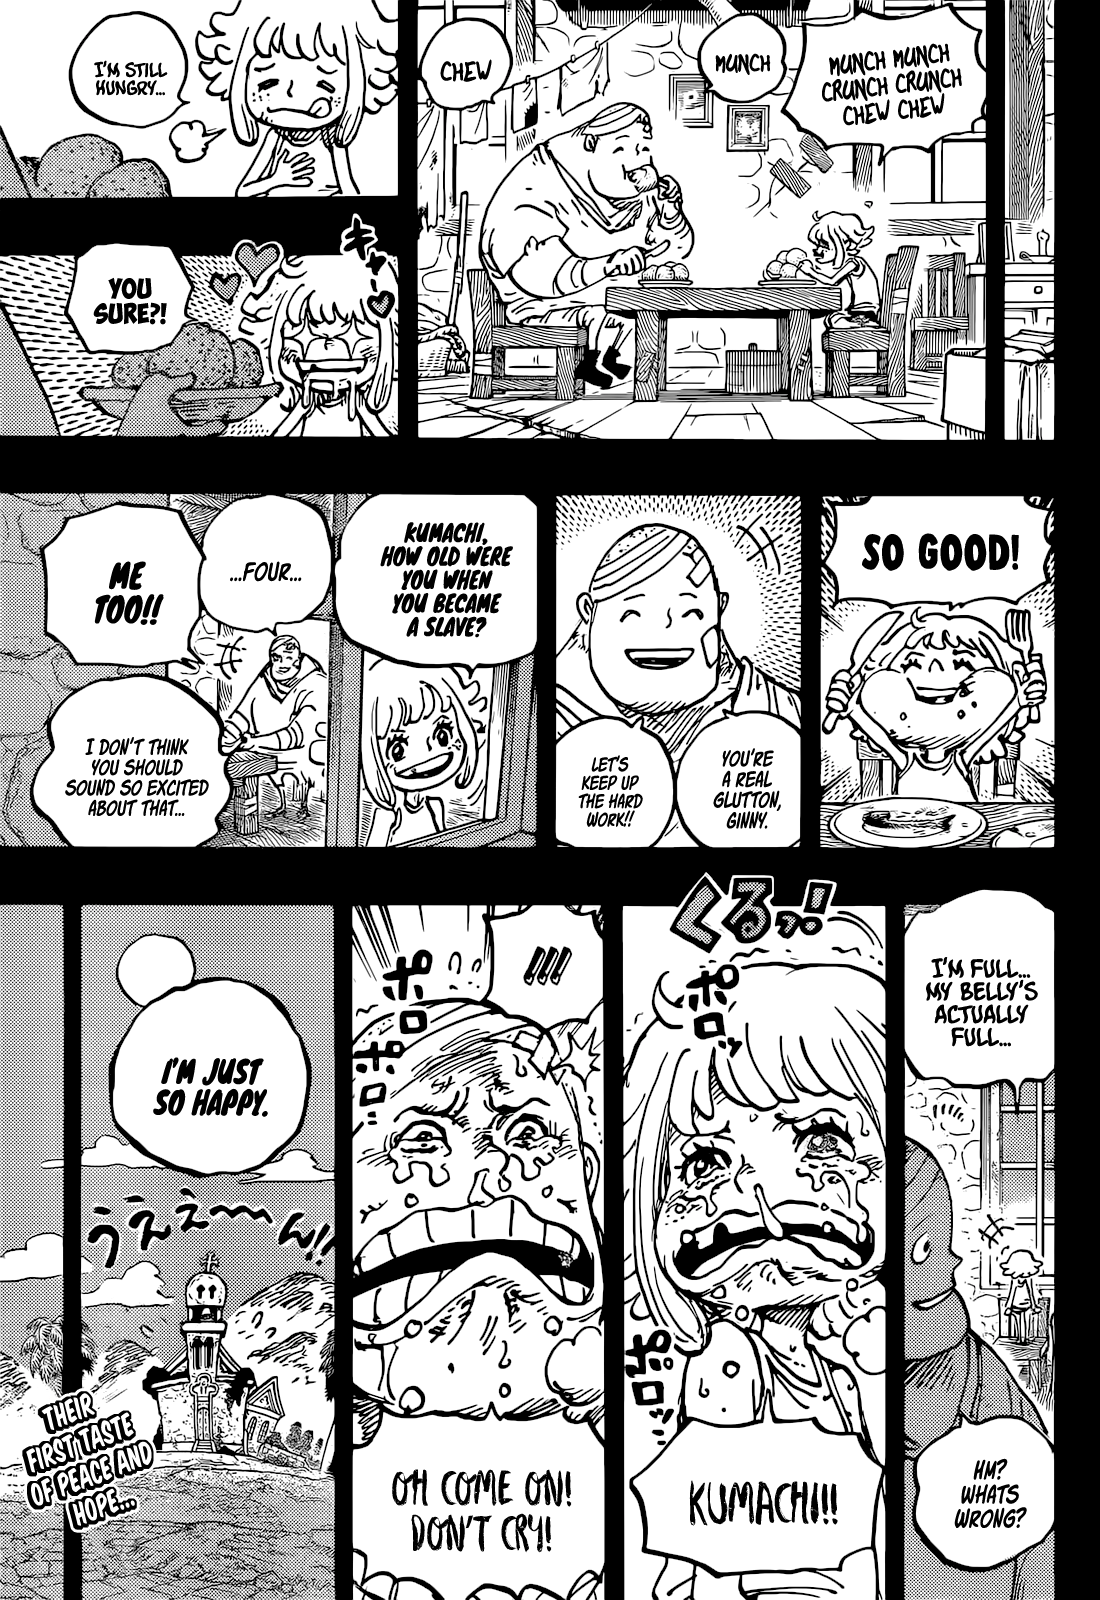 Chapter 1044 spoilers (3 panels leaked!!) : r/OnePiece